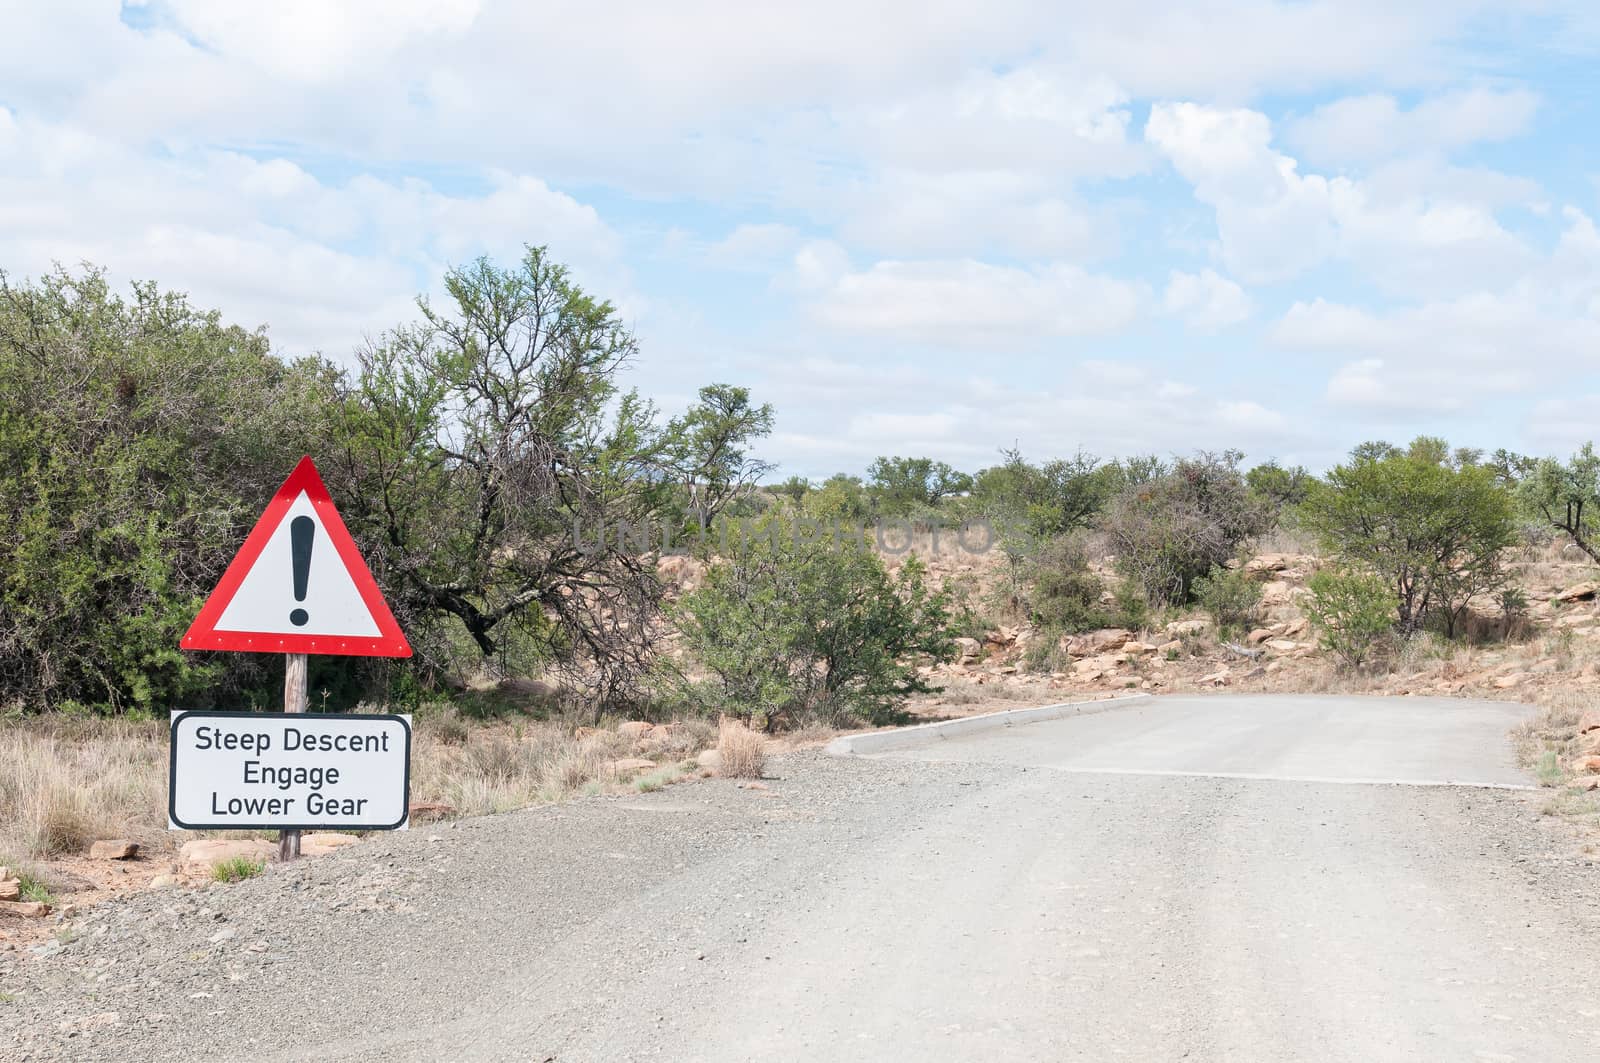 Steep descend warning in the Mountain Zebra National Park by dpreezg